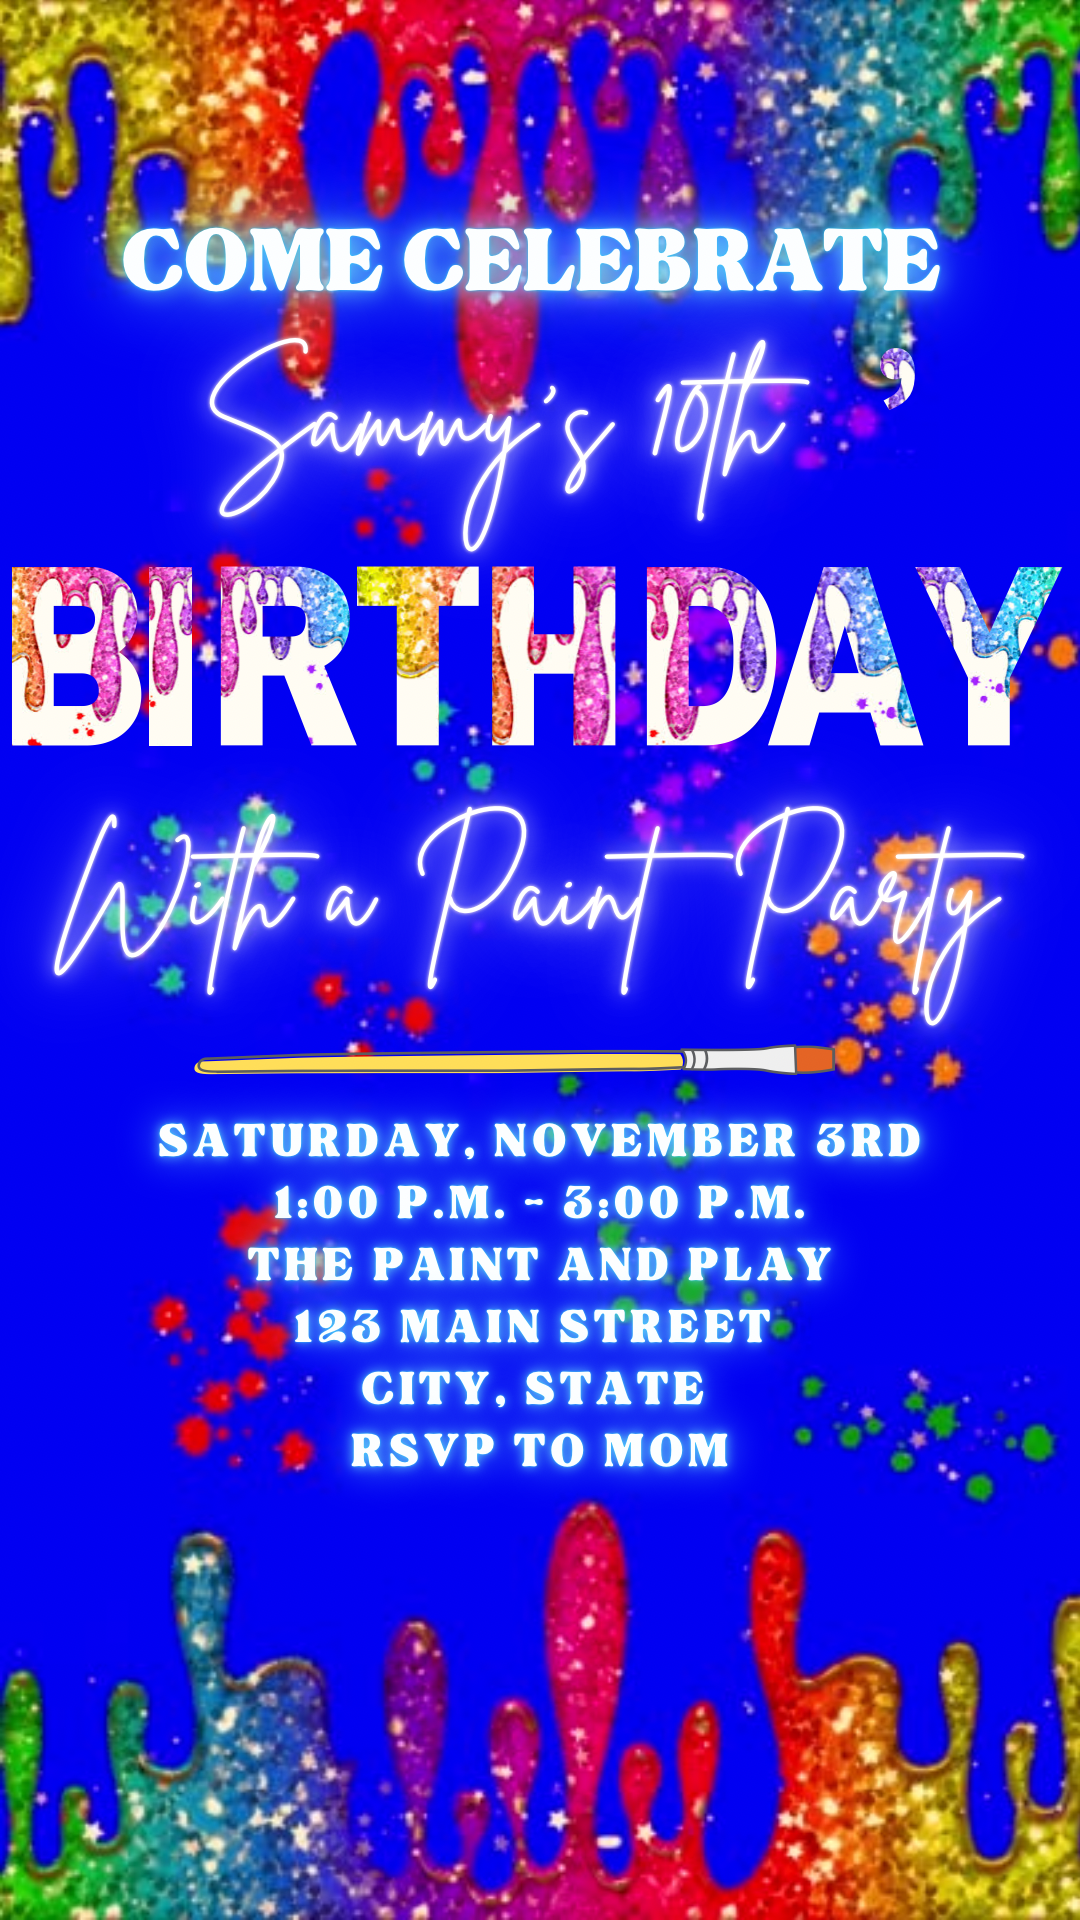 Paint Party Video invitation, Blue Art birthday invitation, Sip and Painting Party